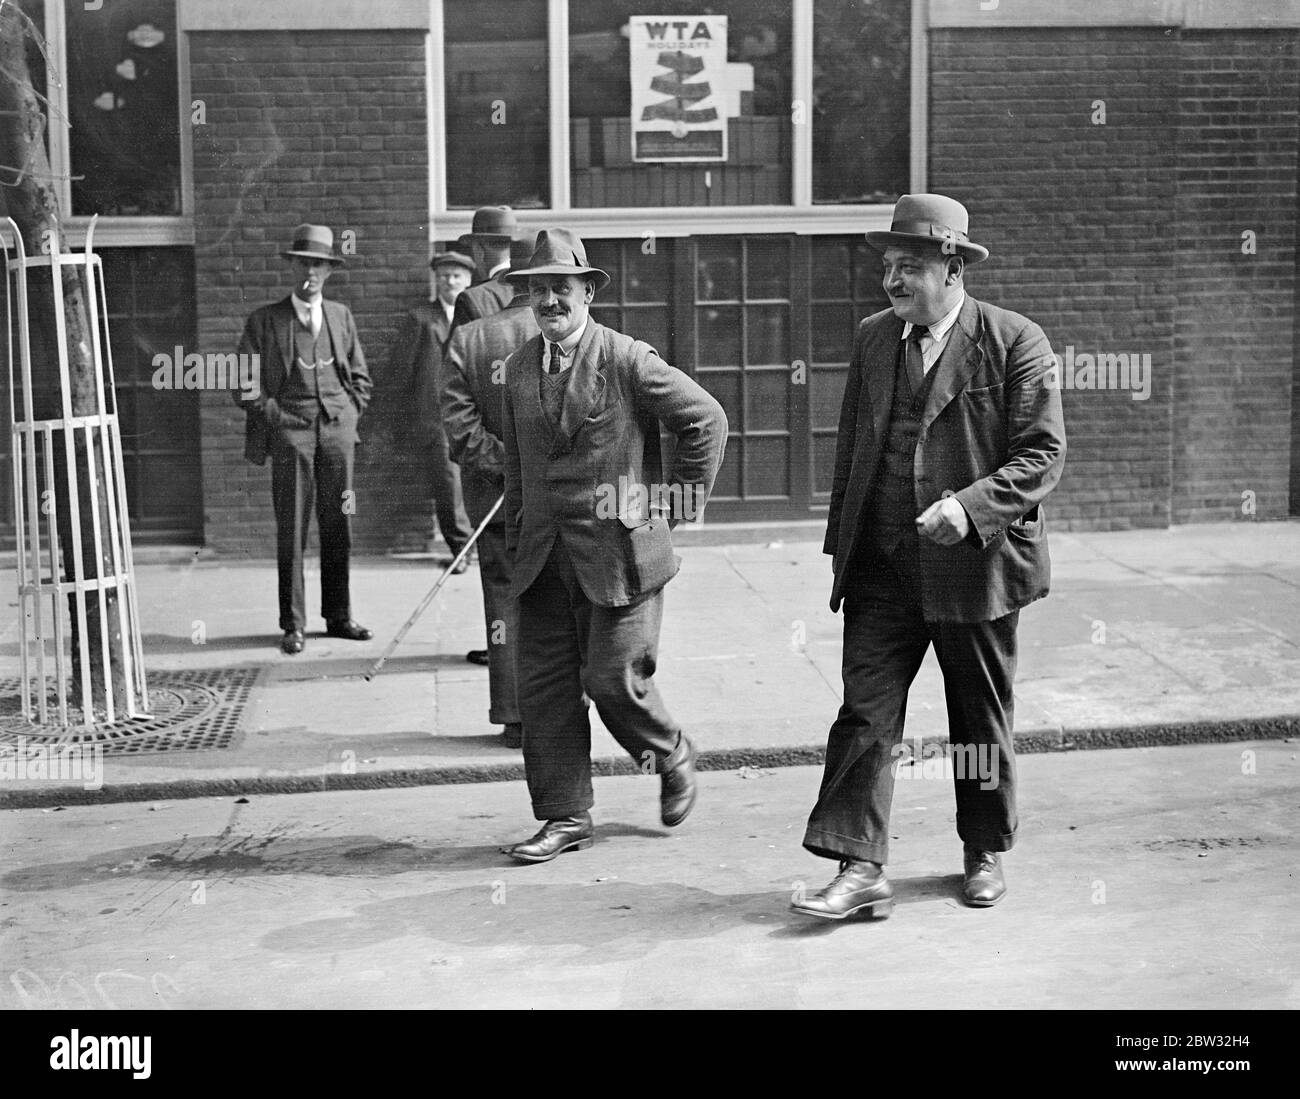 Busmen 's leaders confer at Transport House . Leaders of the Busmen 's Union met at Transport House , London , to discuss the proposed omnibus strike . Mr J Stoneman ( left ) and Mr J Mills , the London district secretary of the Transport and General Workers Union , leaving Transport House after the meeting 29 August 1932 Stock Photo